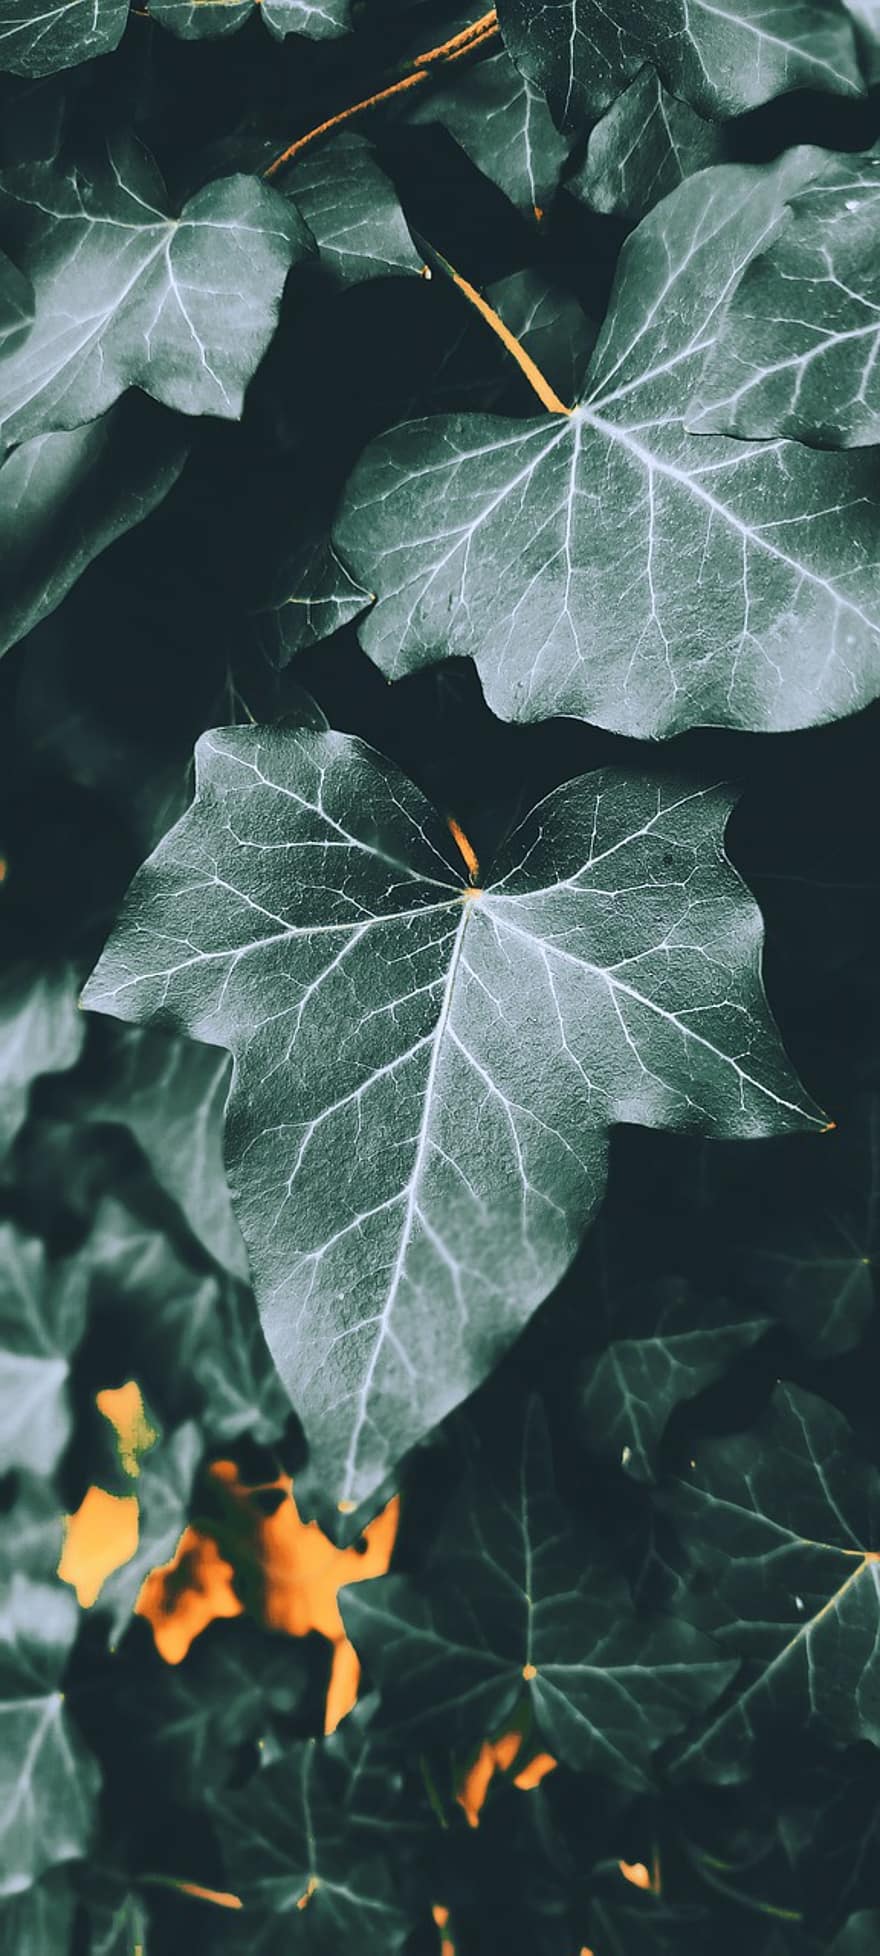 foliages, leaves, nature, leaf, backgrounds, autumn, plant, close-up, season, pattern, abstract